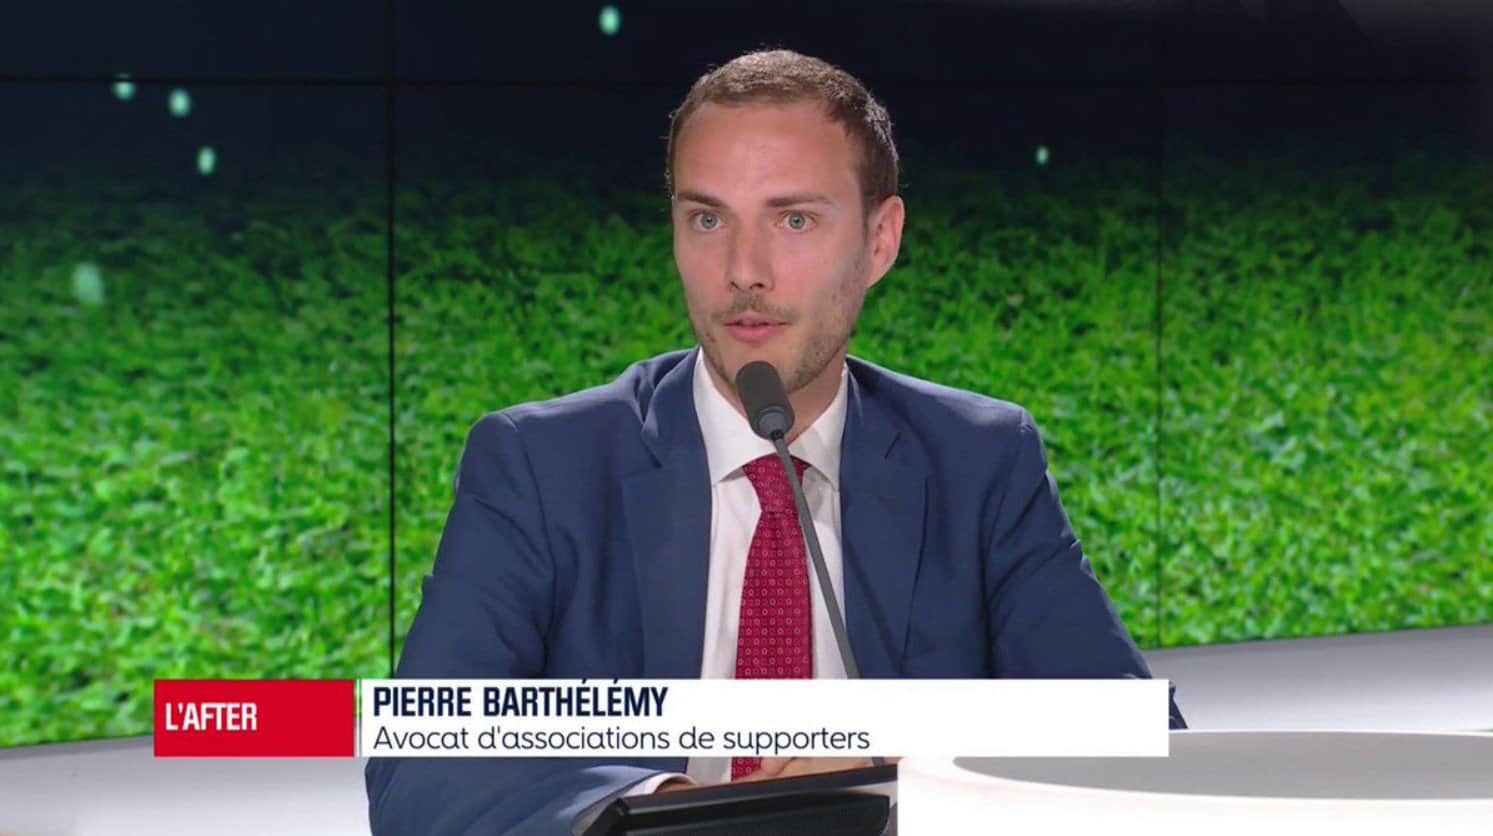 pierre barthelemy Pierre Barthélemy, the man who defends those excluded from soccer stadiums